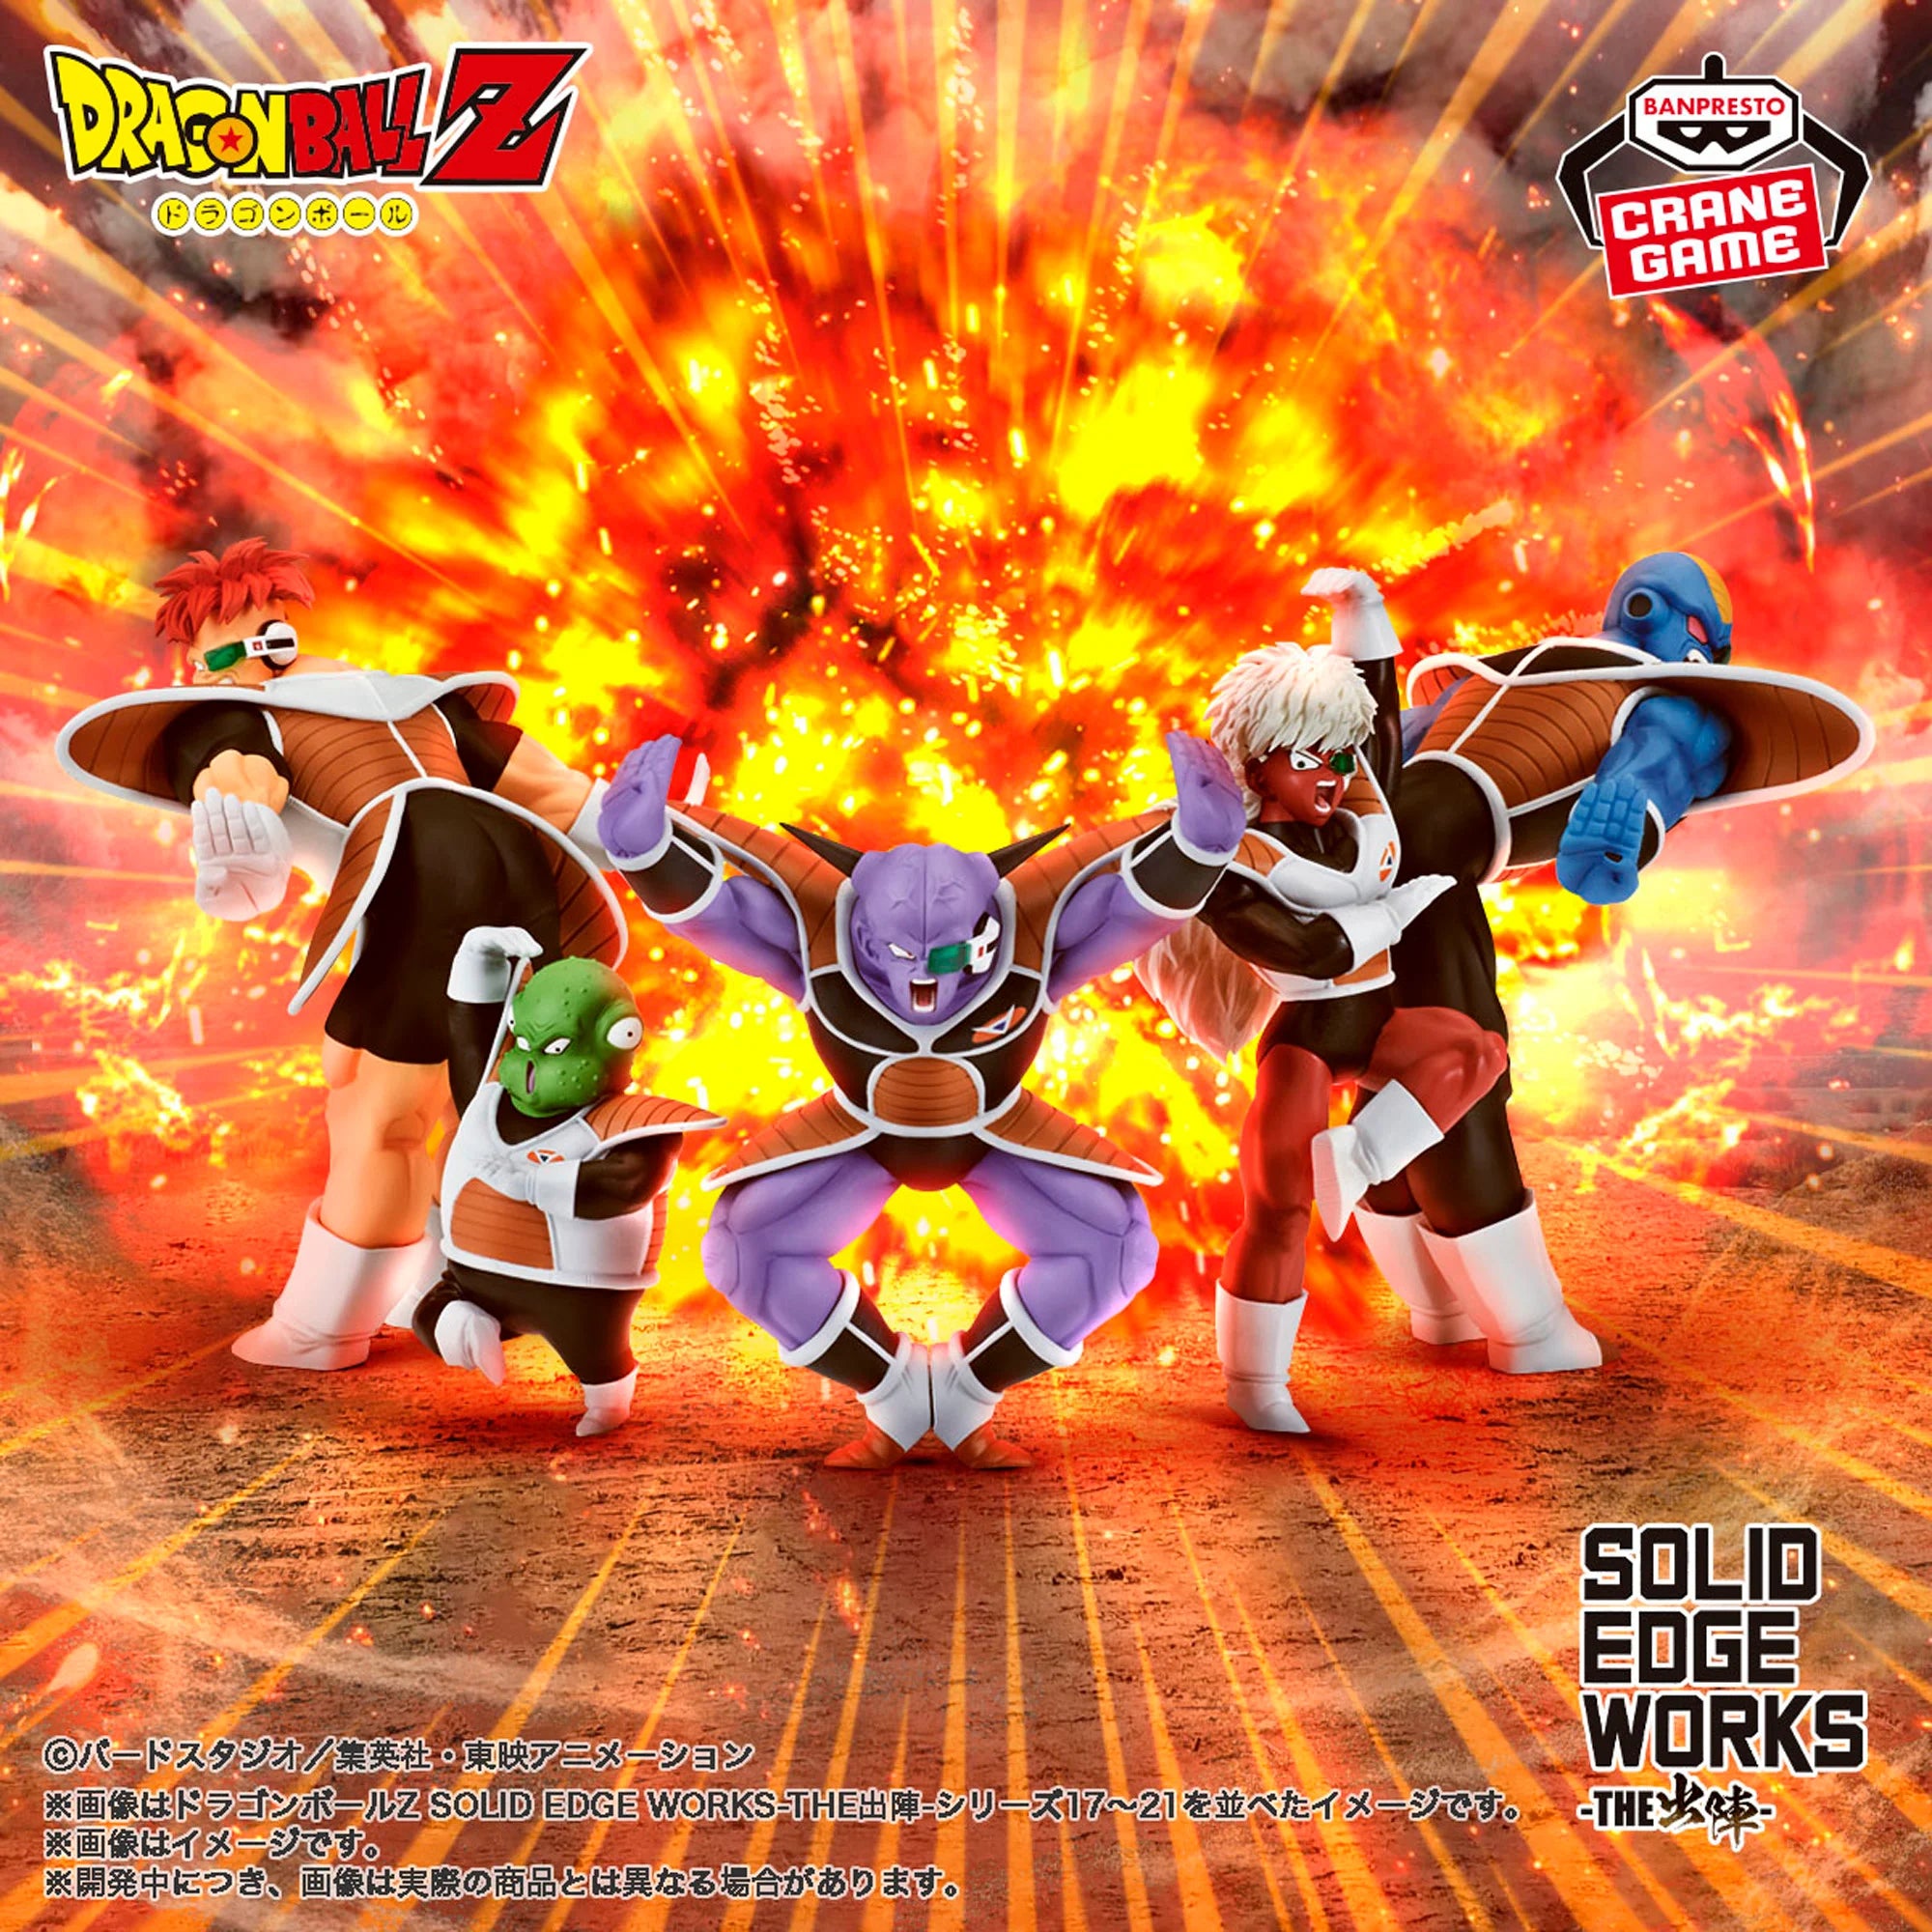 DRAGON BALL Z SOLID EDGE WORKS -THE DEPARTURE- GINYU FORCE'S "FIGHTING POSE"